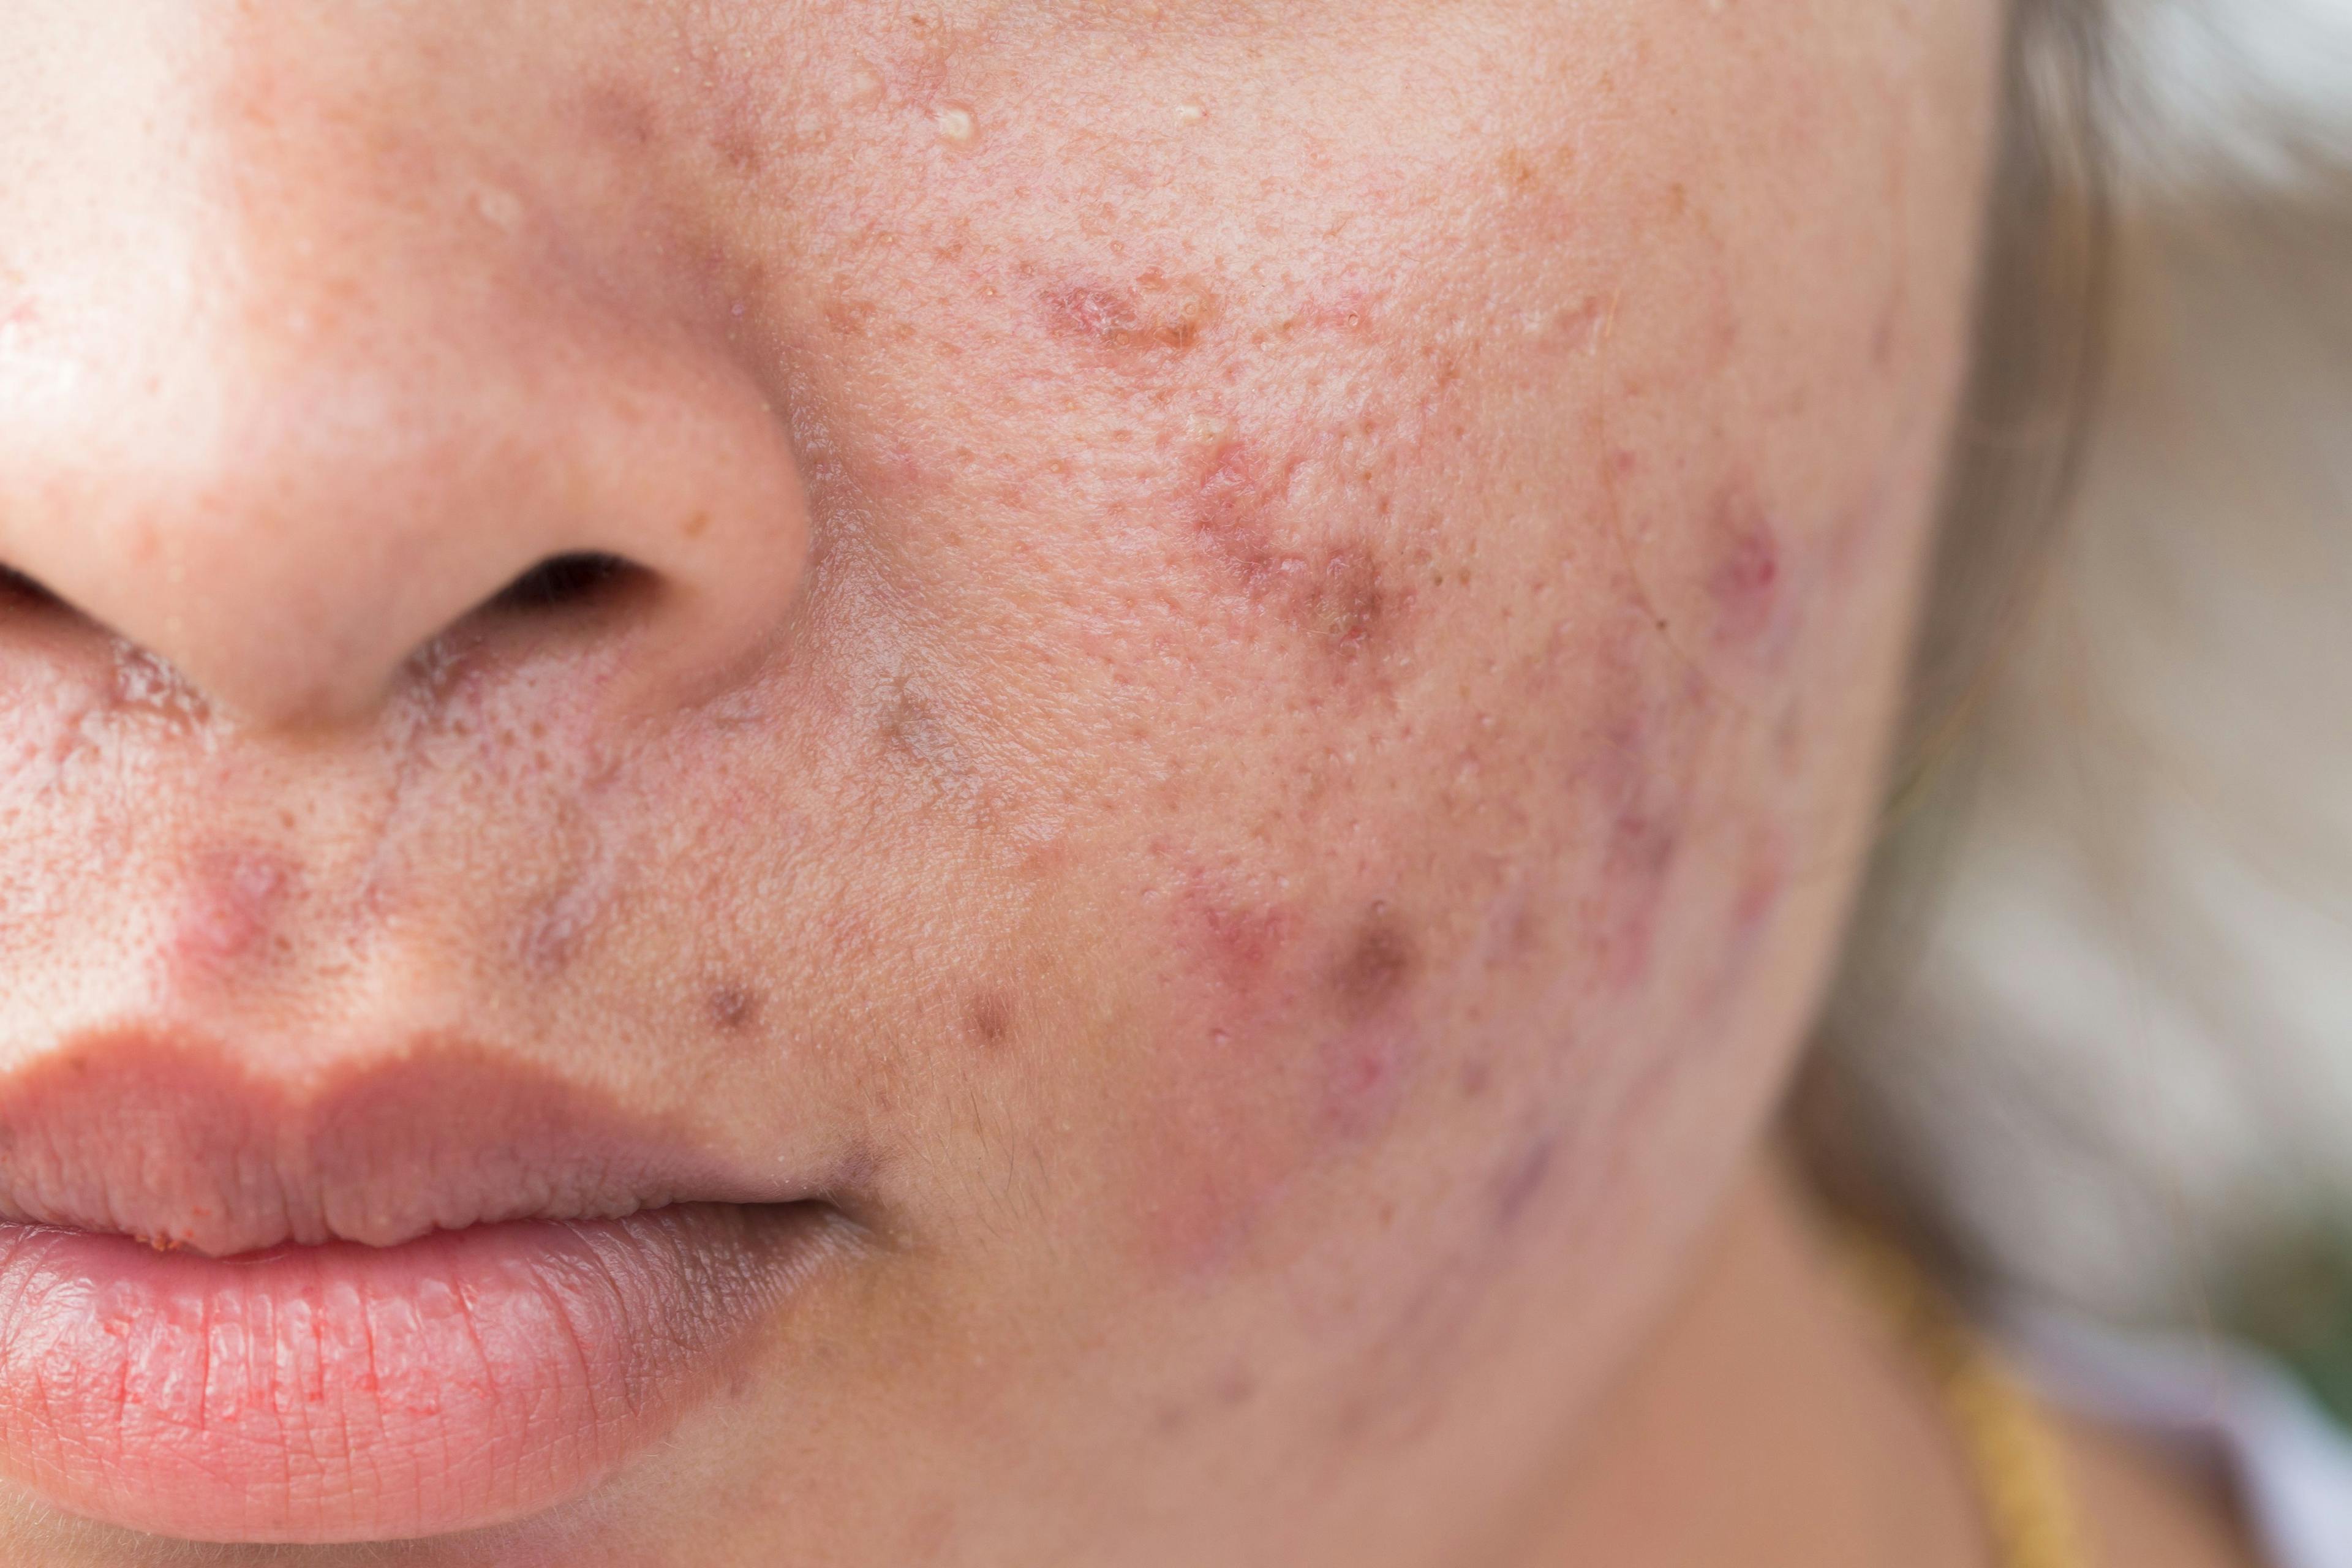 Minocycline as foam topical under study in acne